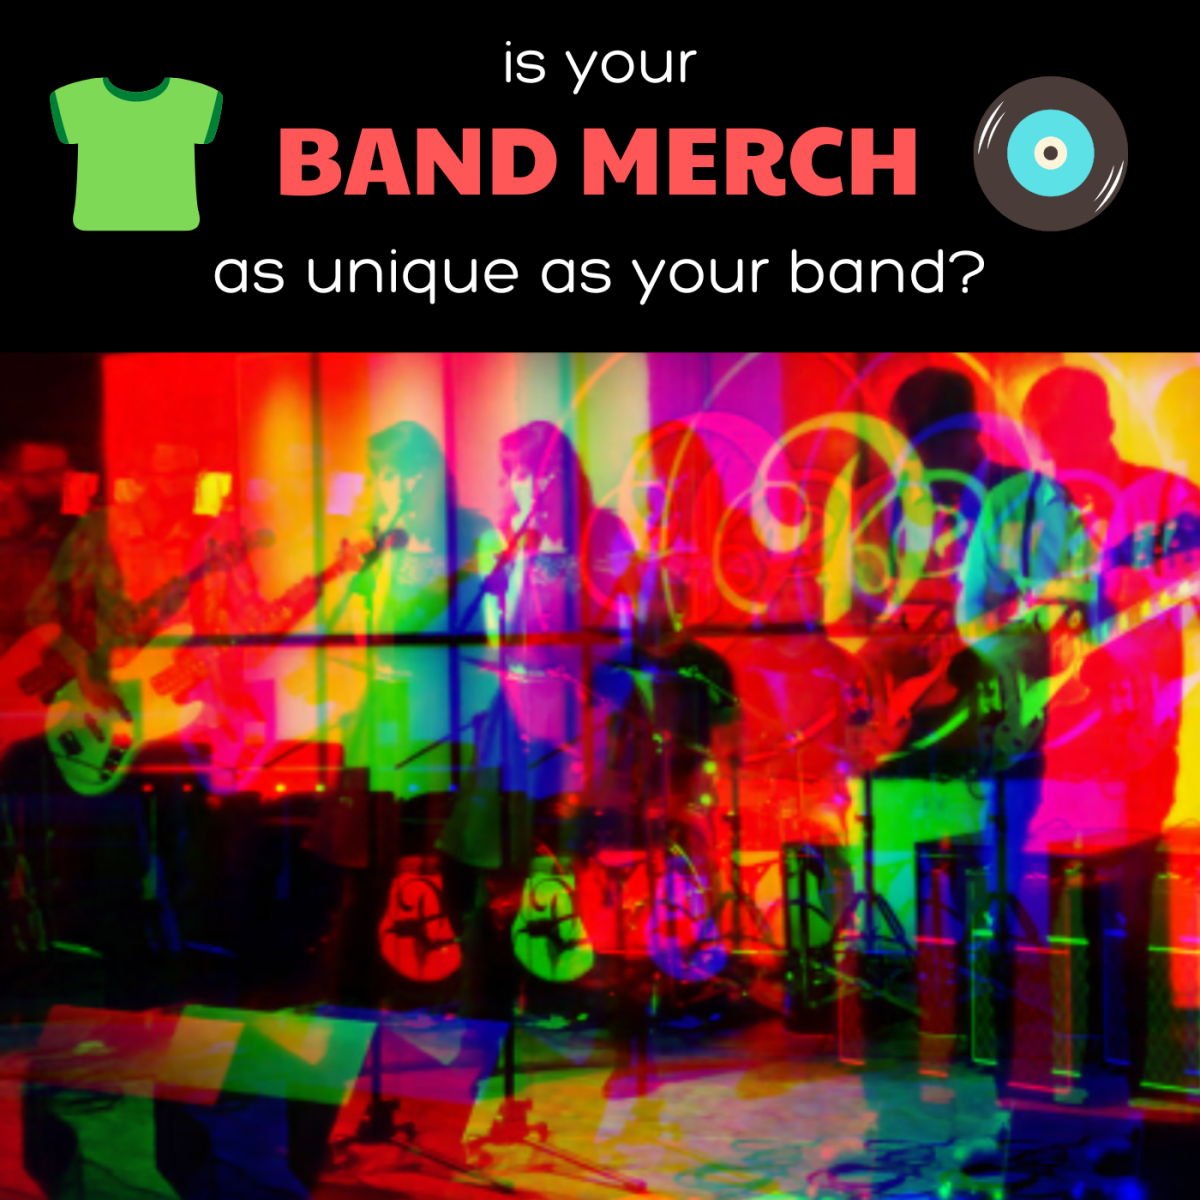 Merch ideas to help your band stand out